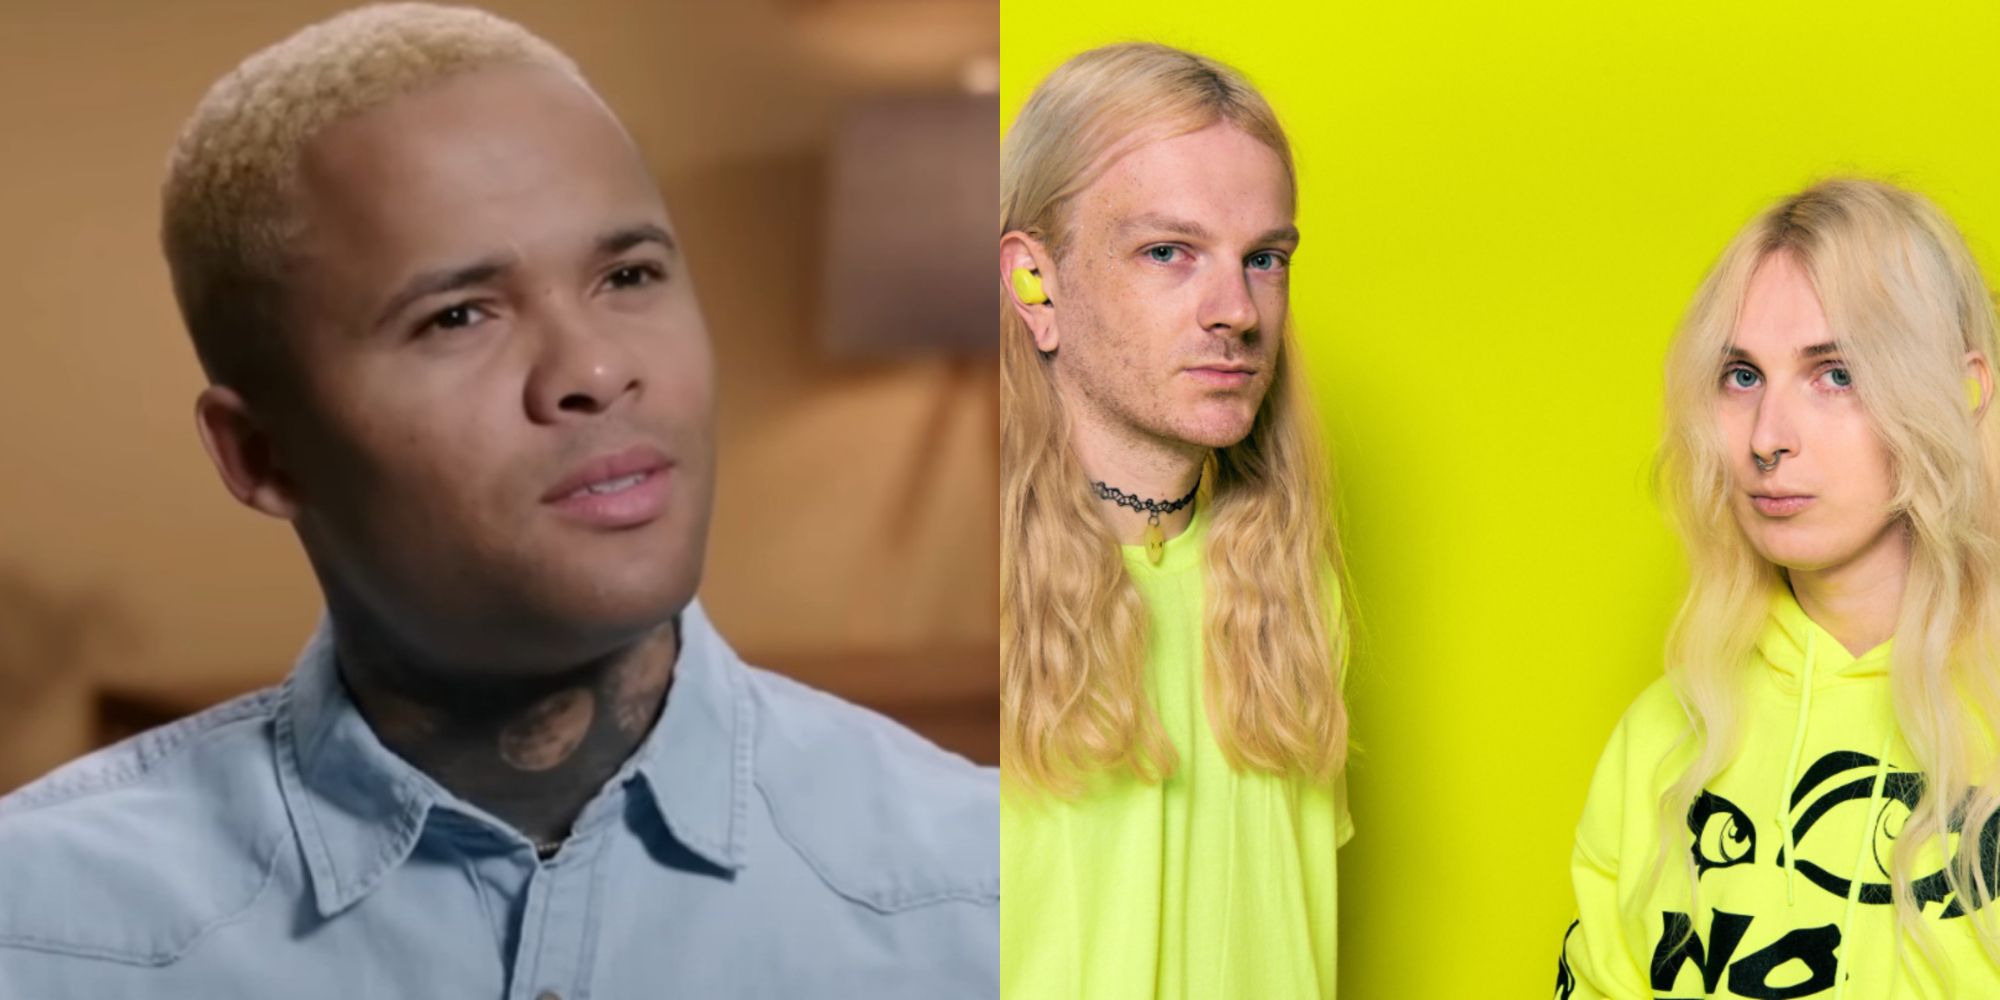 Split image showing Jibri Bell in 90 Day Fiancé and the band 100 Gecs.